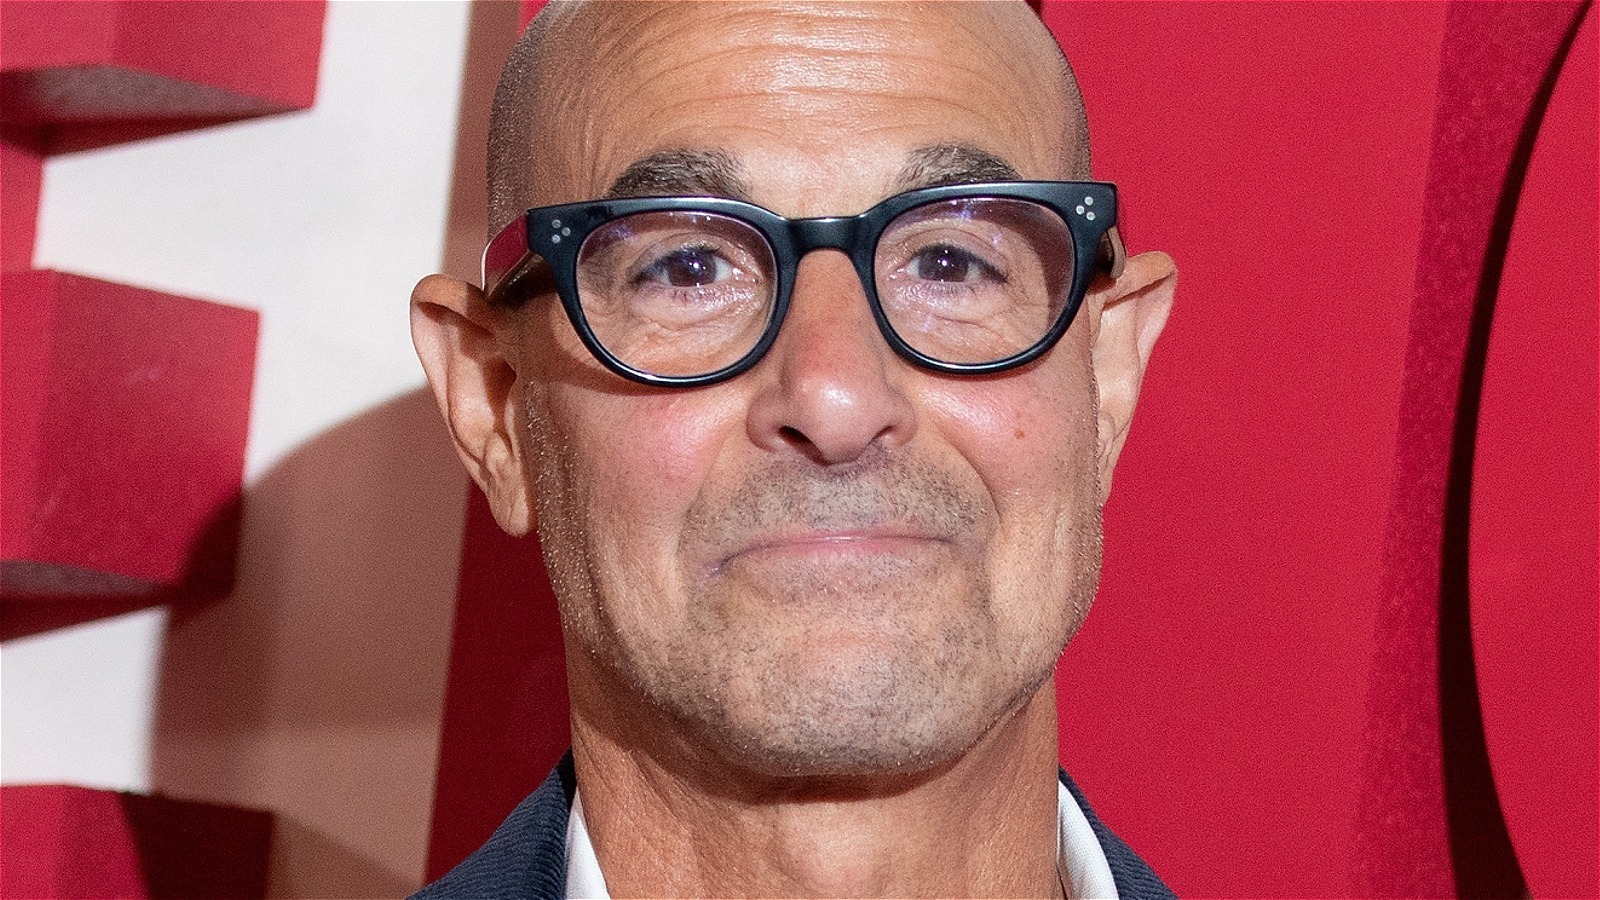 Stanley Tucci’s Leftover Pasta Creation Can Basically Be Eaten For Any Meal – Mashed